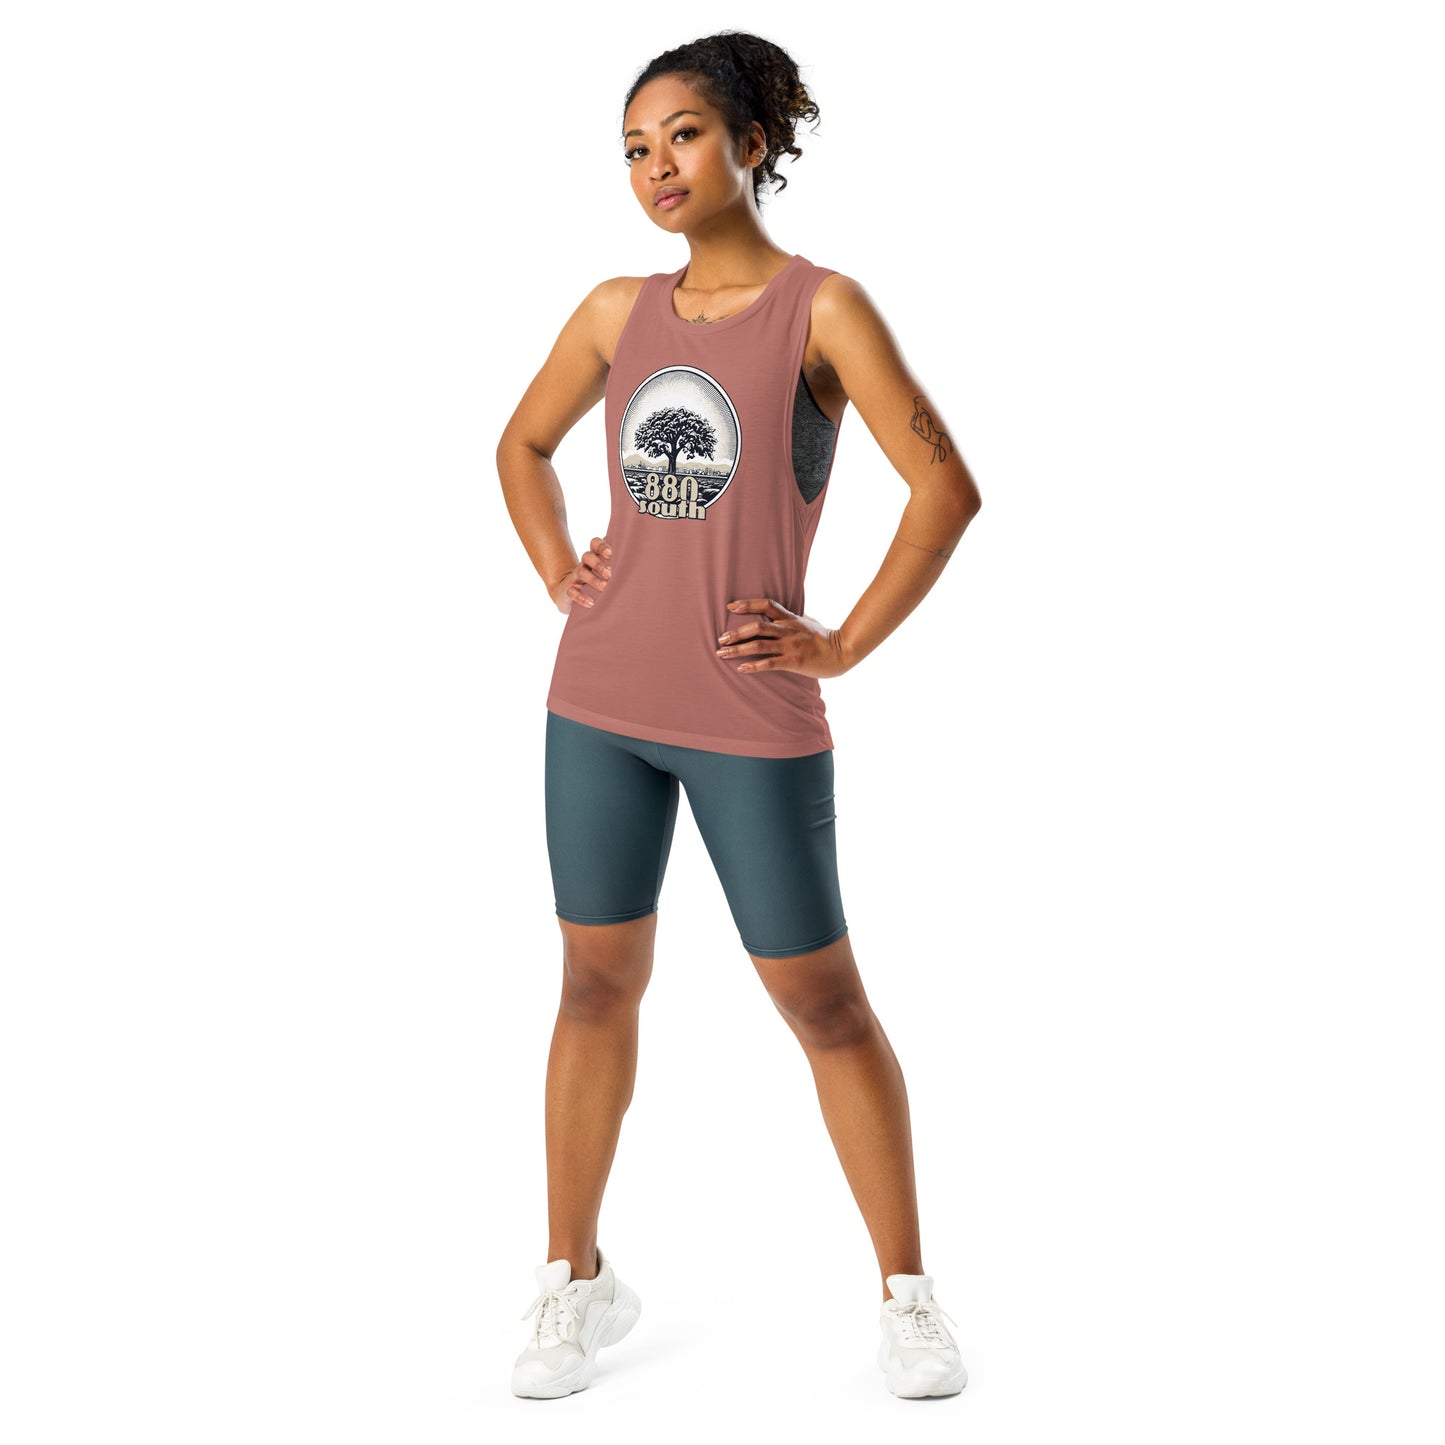 880 South Orchard City - Ladies’ Muscle Tank